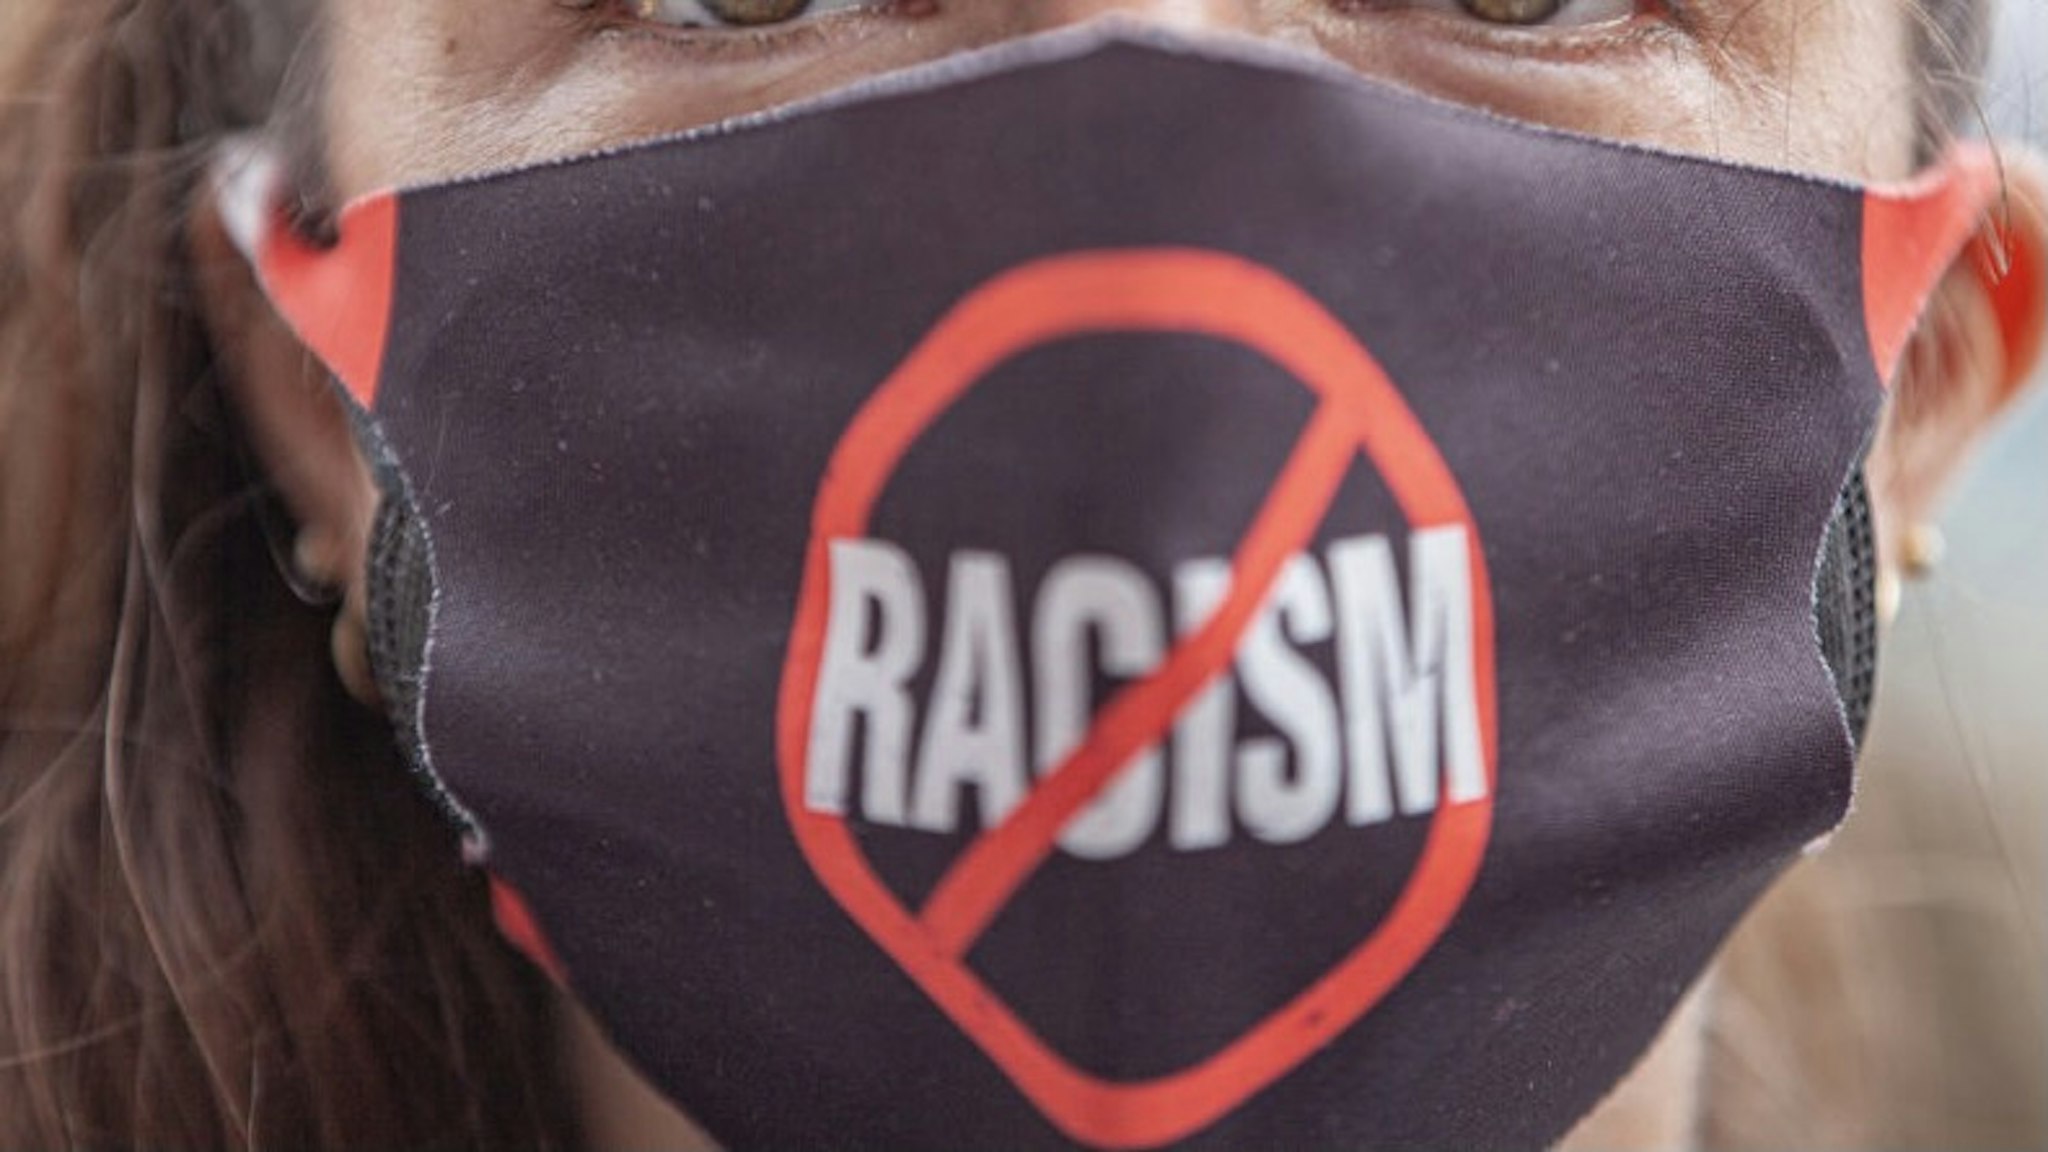 COLUMBUS, OH - APRIL 17: A Black Lives Matter activist wears an anti-racism facial covering at a protest against police brutality in front of the Ohio Statehouse on April 17, 2021 in Columbus, Ohio. Demonstrators gathered in response to multiple recent officer-involved shootings in the U.S. including Miles Jackson, 27, who was fatally shot by Columbus Police in Mount Carmel St. Anns Hospital in Westerville, Ohio on April 12. (Photo by Stephen Zenner/Getty Images)